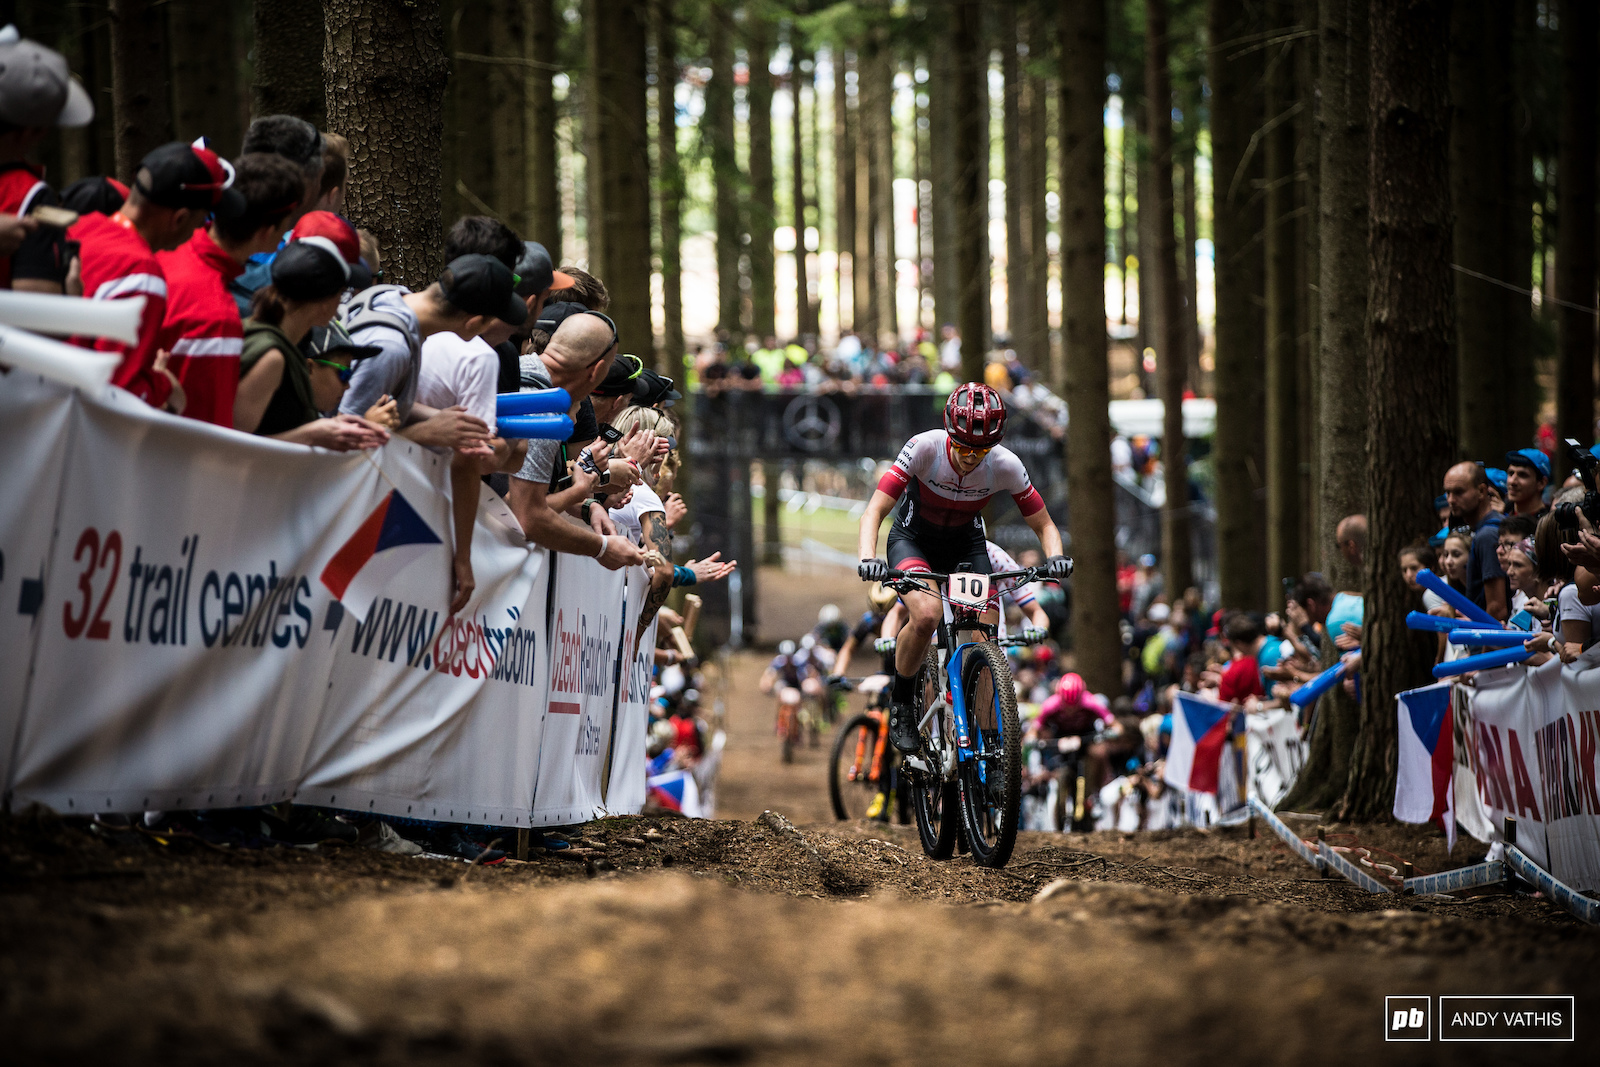 Haley Smith kicked off 2019 with a bang. She started with a top 10 in Albstadt and then achieved a third place finish in Nove Mesto - her first podium.